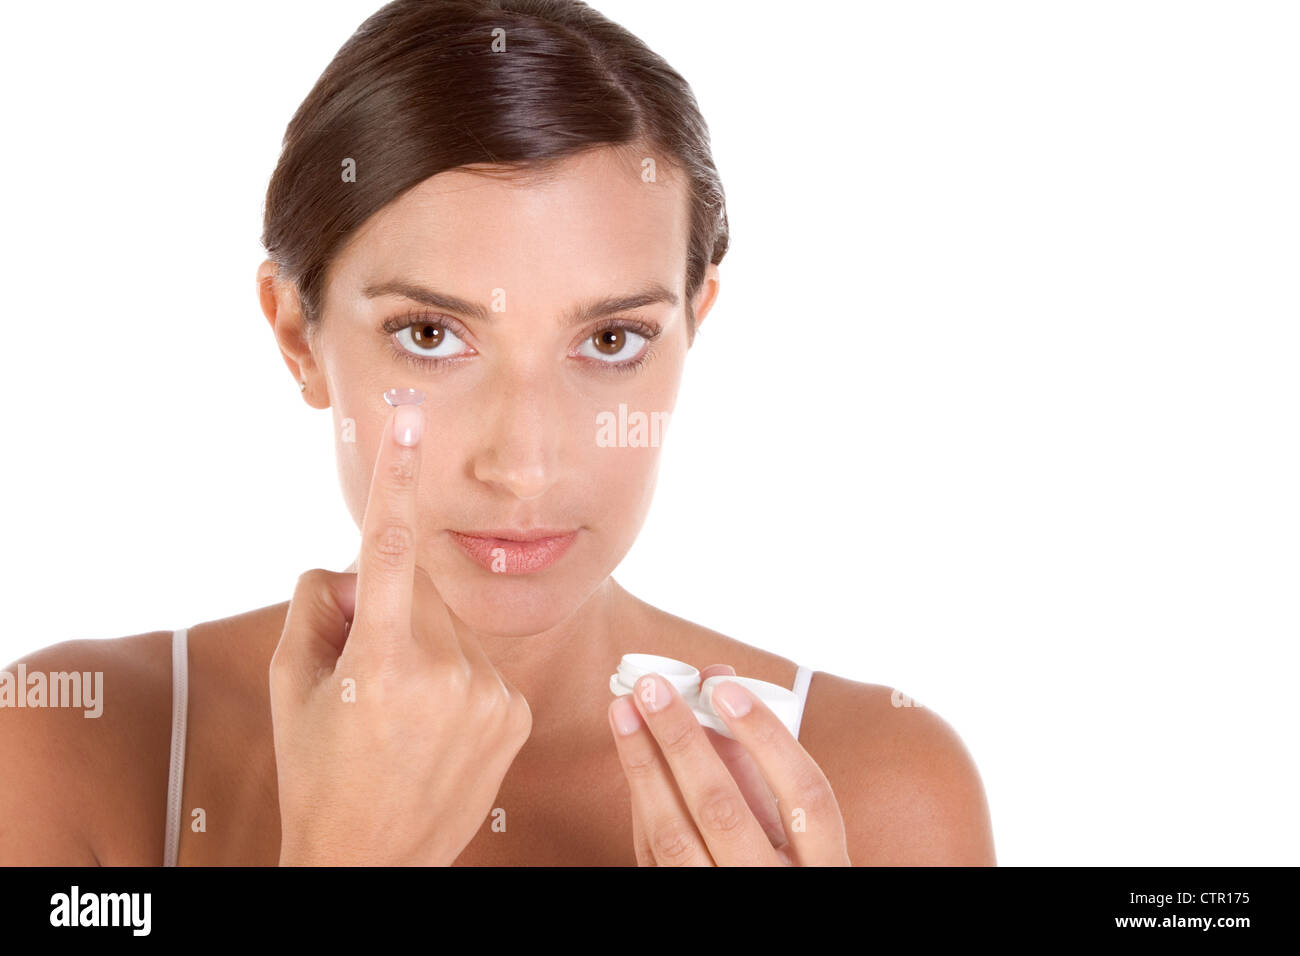 woman putting on contact lenses Stock Photo